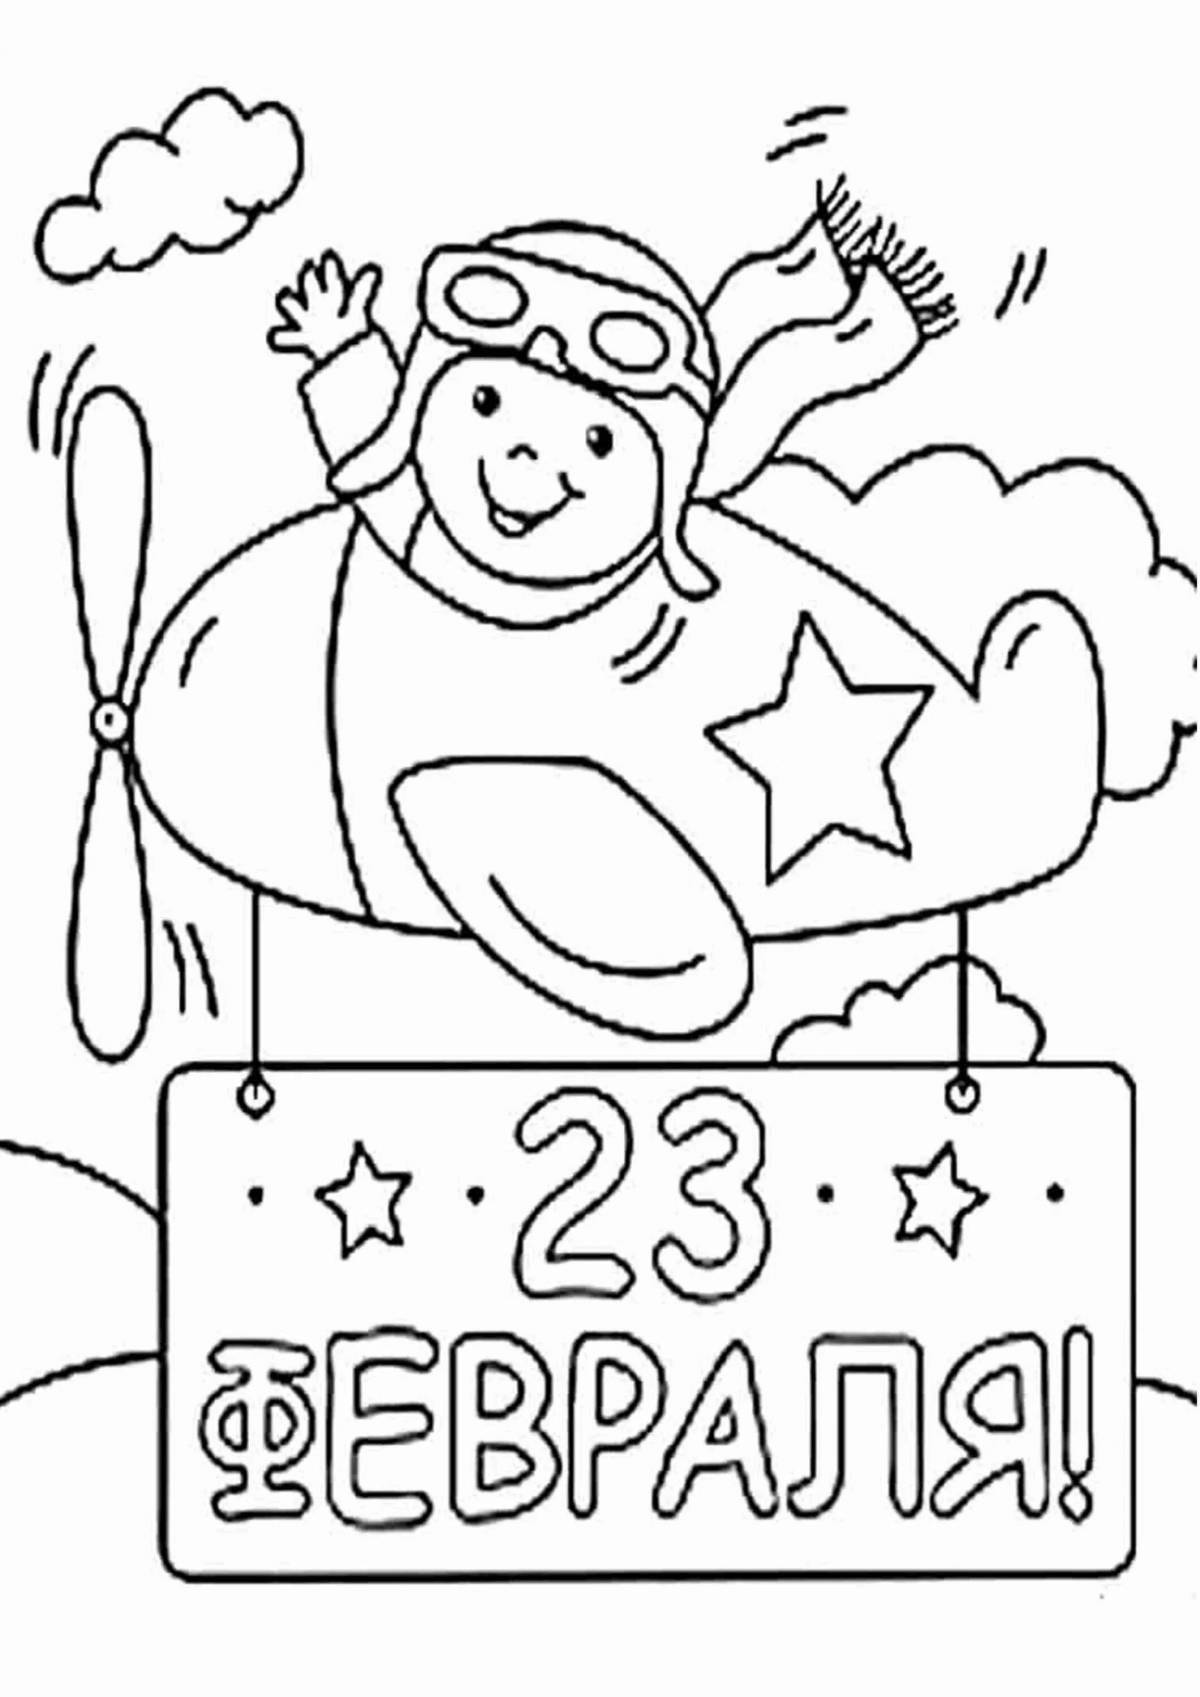 Colorful children's easy coloring pages